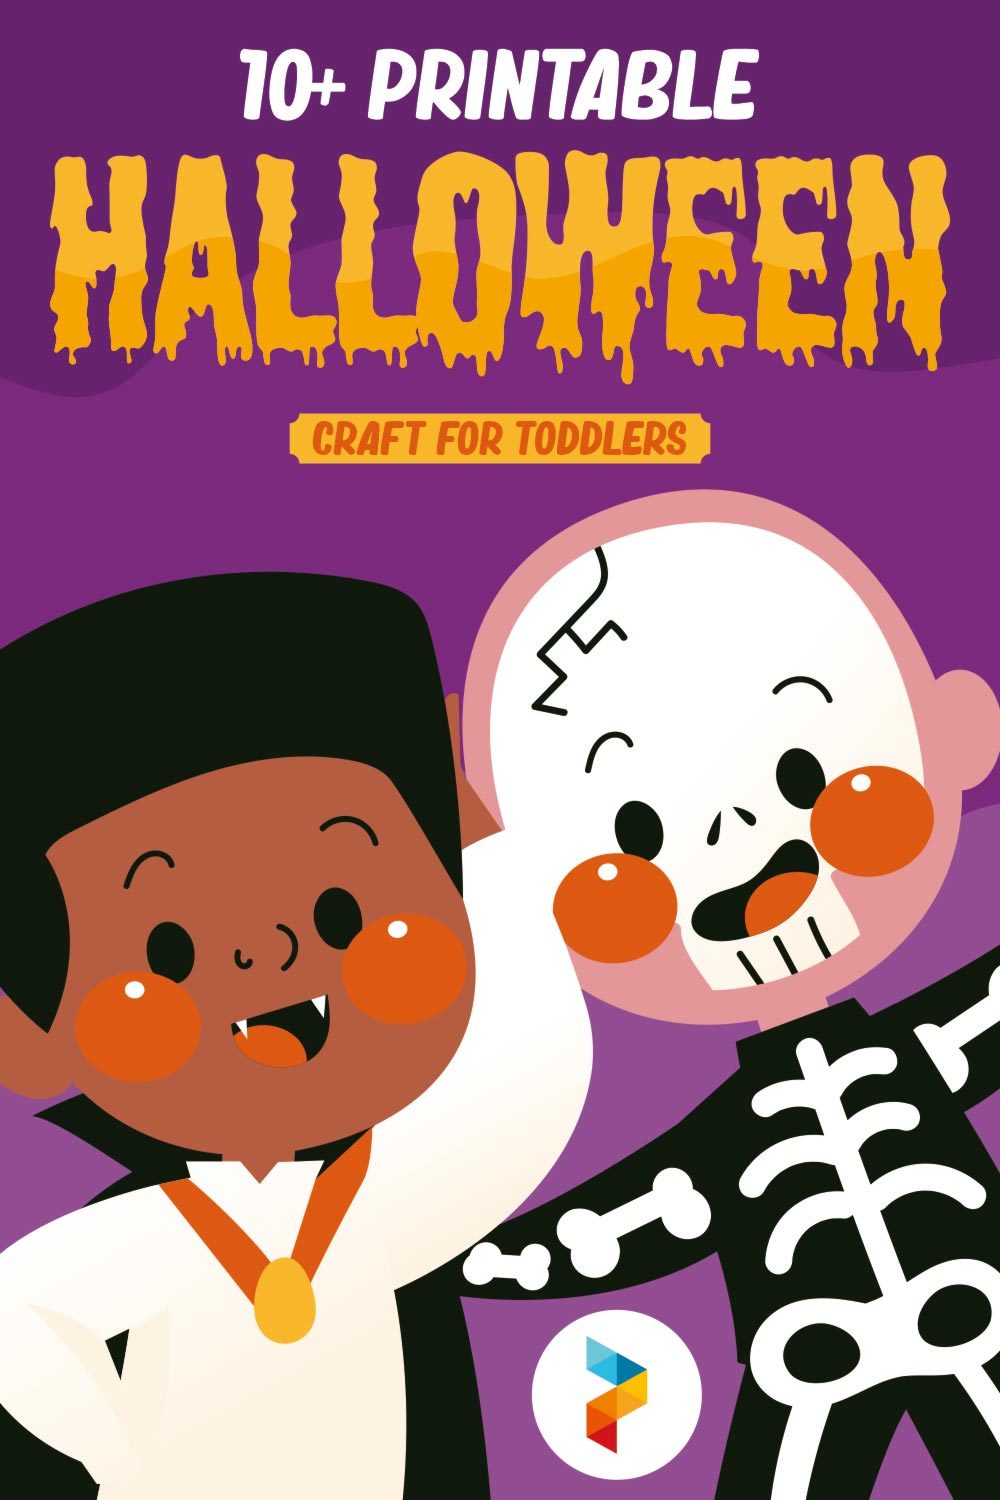 Printable Halloween Crafts For Toddlers